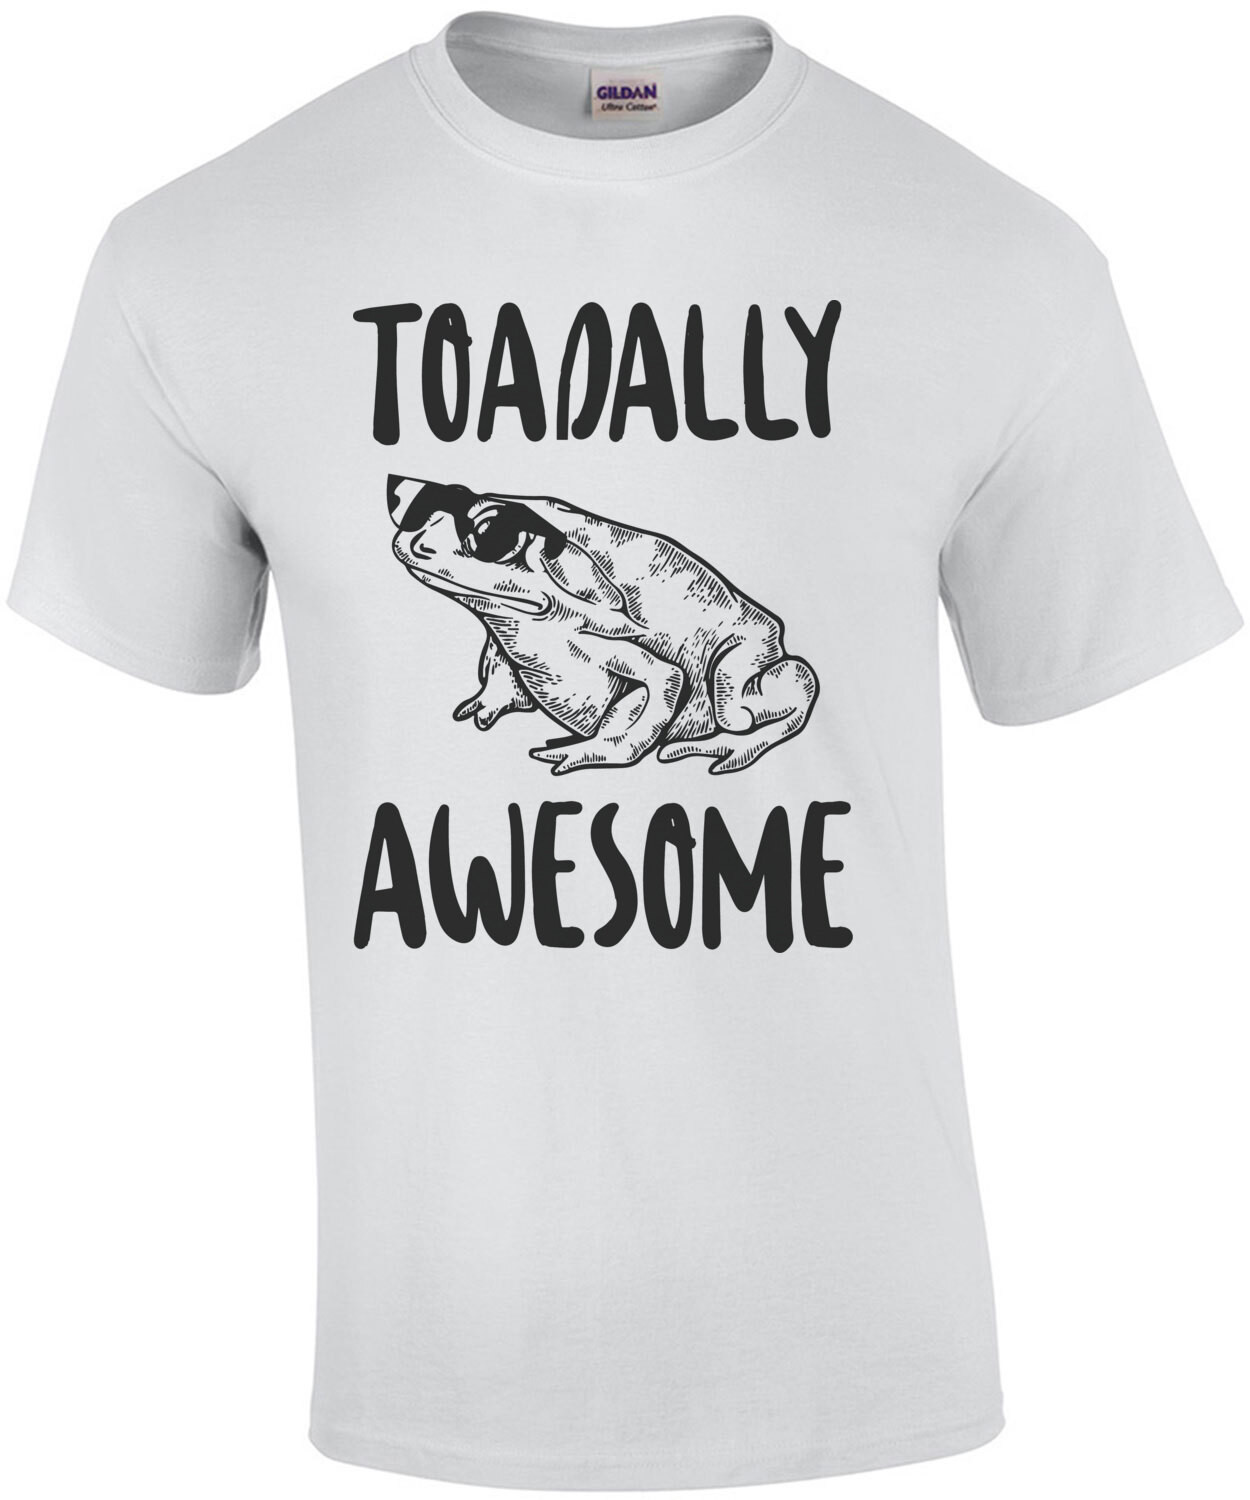 Toadally Awesome - funny pun t-shirt